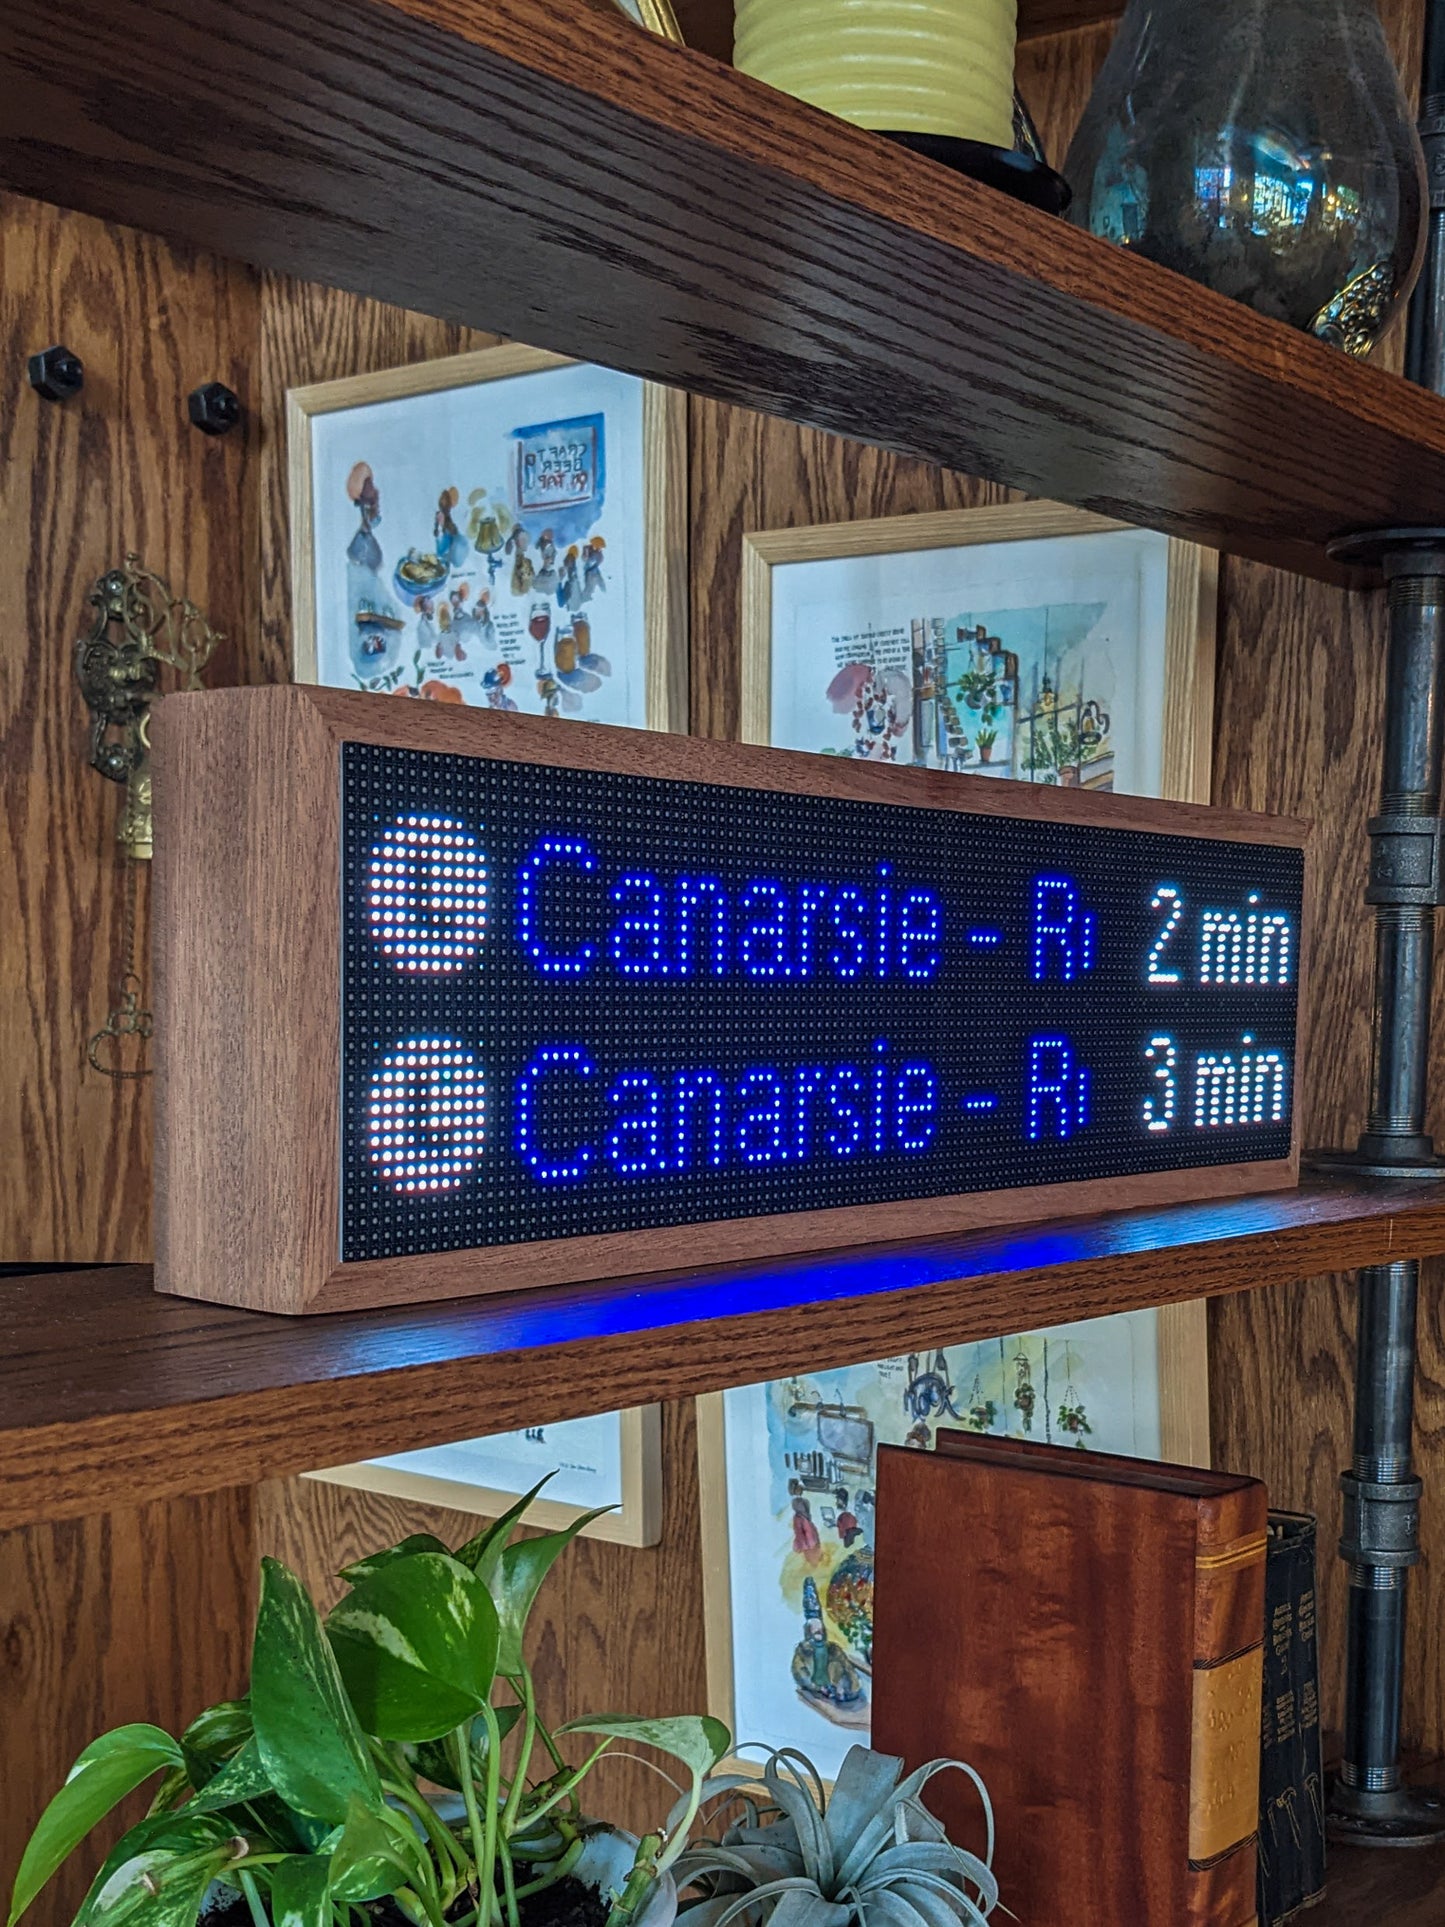 The NYC Realtime Subway Clock is angled on the middle shelf of a mahogany bookcase. The Mahogany frame holds a black LED screen that reads, "L Canarsie - R -2 min" and below that "L Canarsie -R  3 Min" metal pipes hold the shelves up. A green potted plant, a silver potted plant, and a brown large leather book sit on the shelf below the subway clock. In the back are four various illustrations that are framed and hang on the mahogany wood wall.